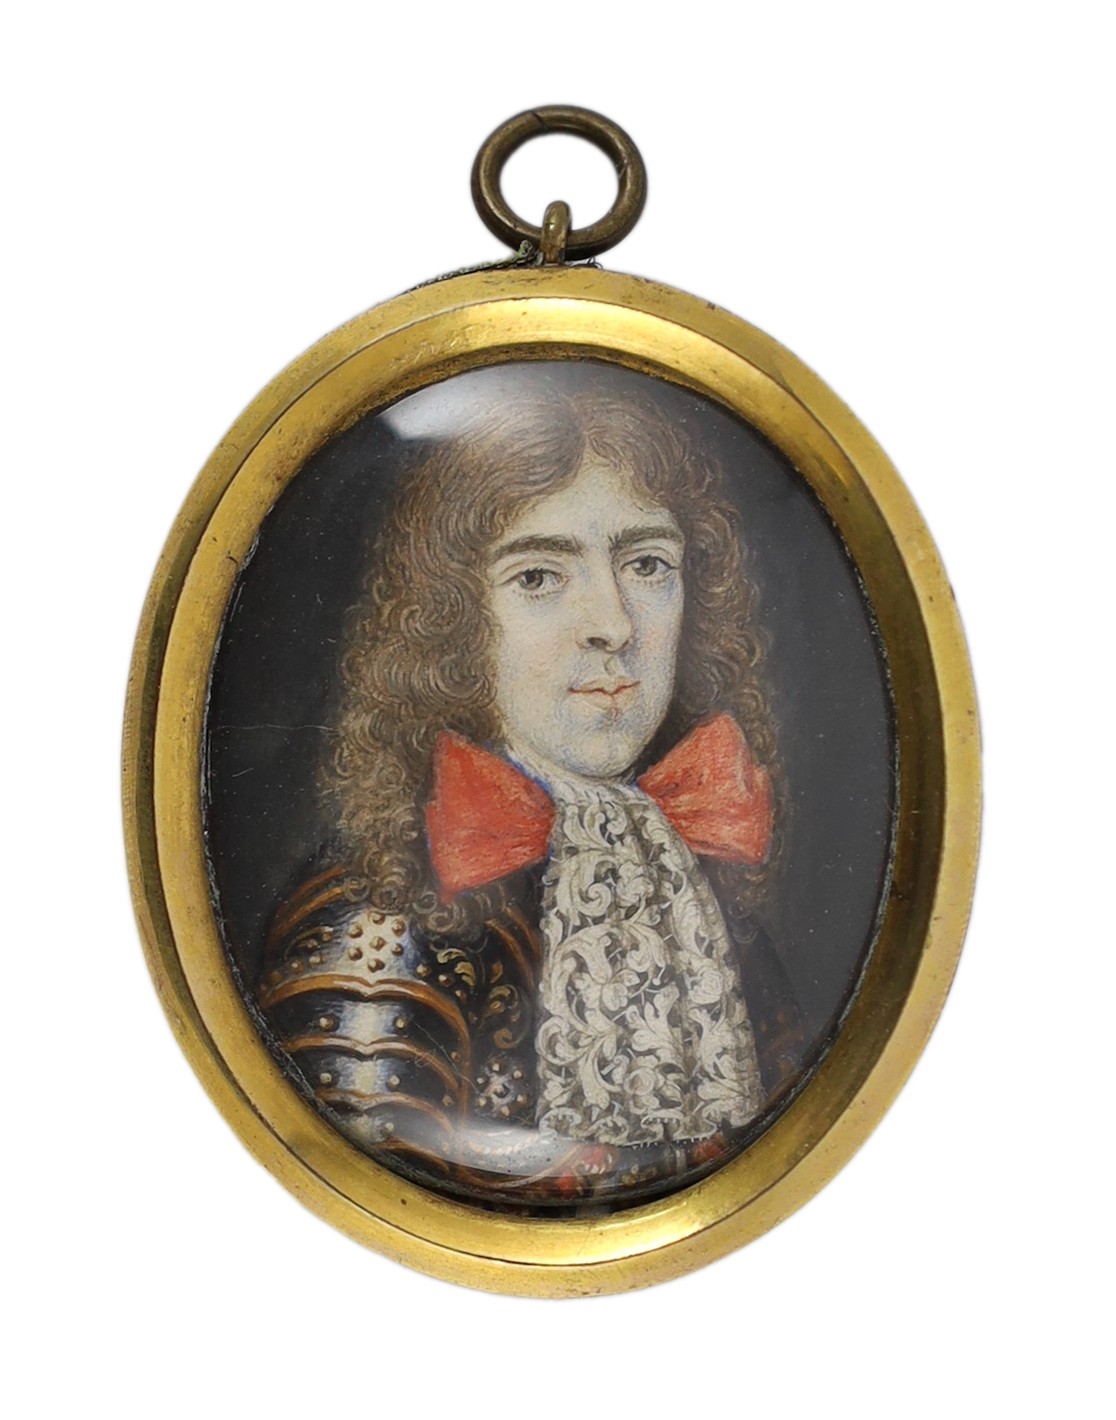 Manner of Pierre Huaut (Swiss, 1647-1698), Portrait miniature of a gentleman wearing armour, watercolour on ivory, 4.5 x 3.25cm